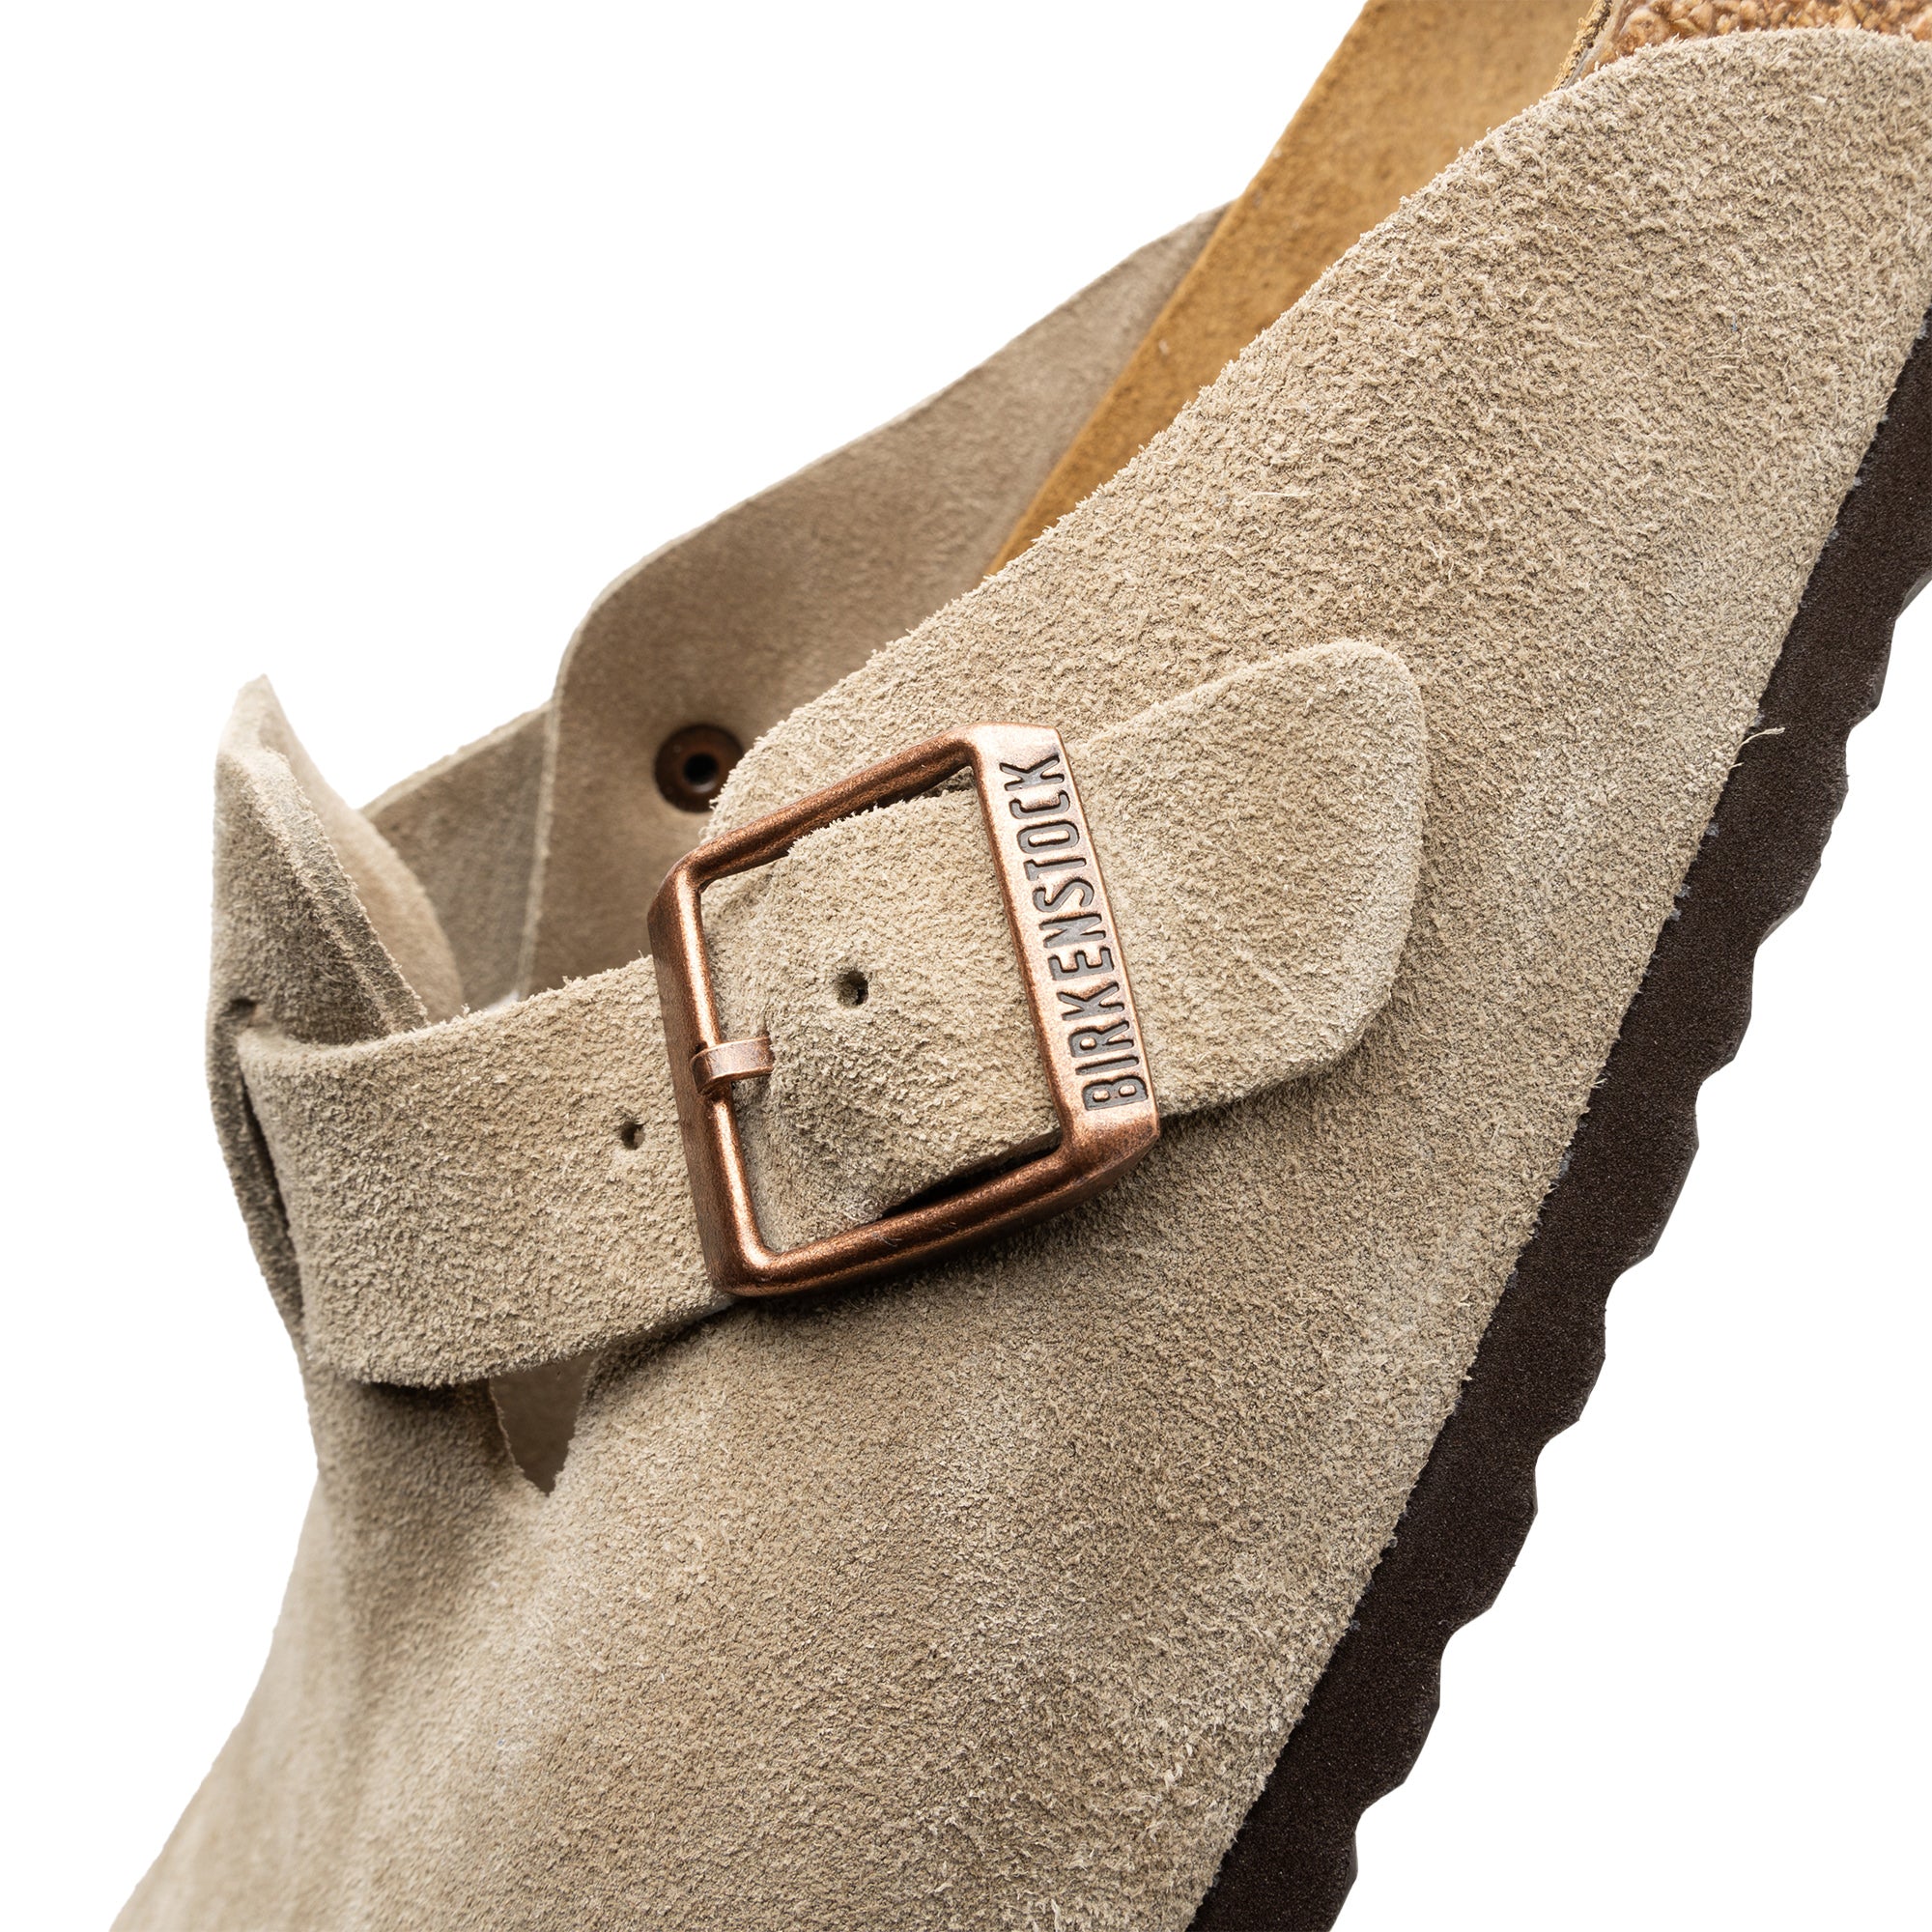 Boston Soft Footbed Taupe Suede 560771